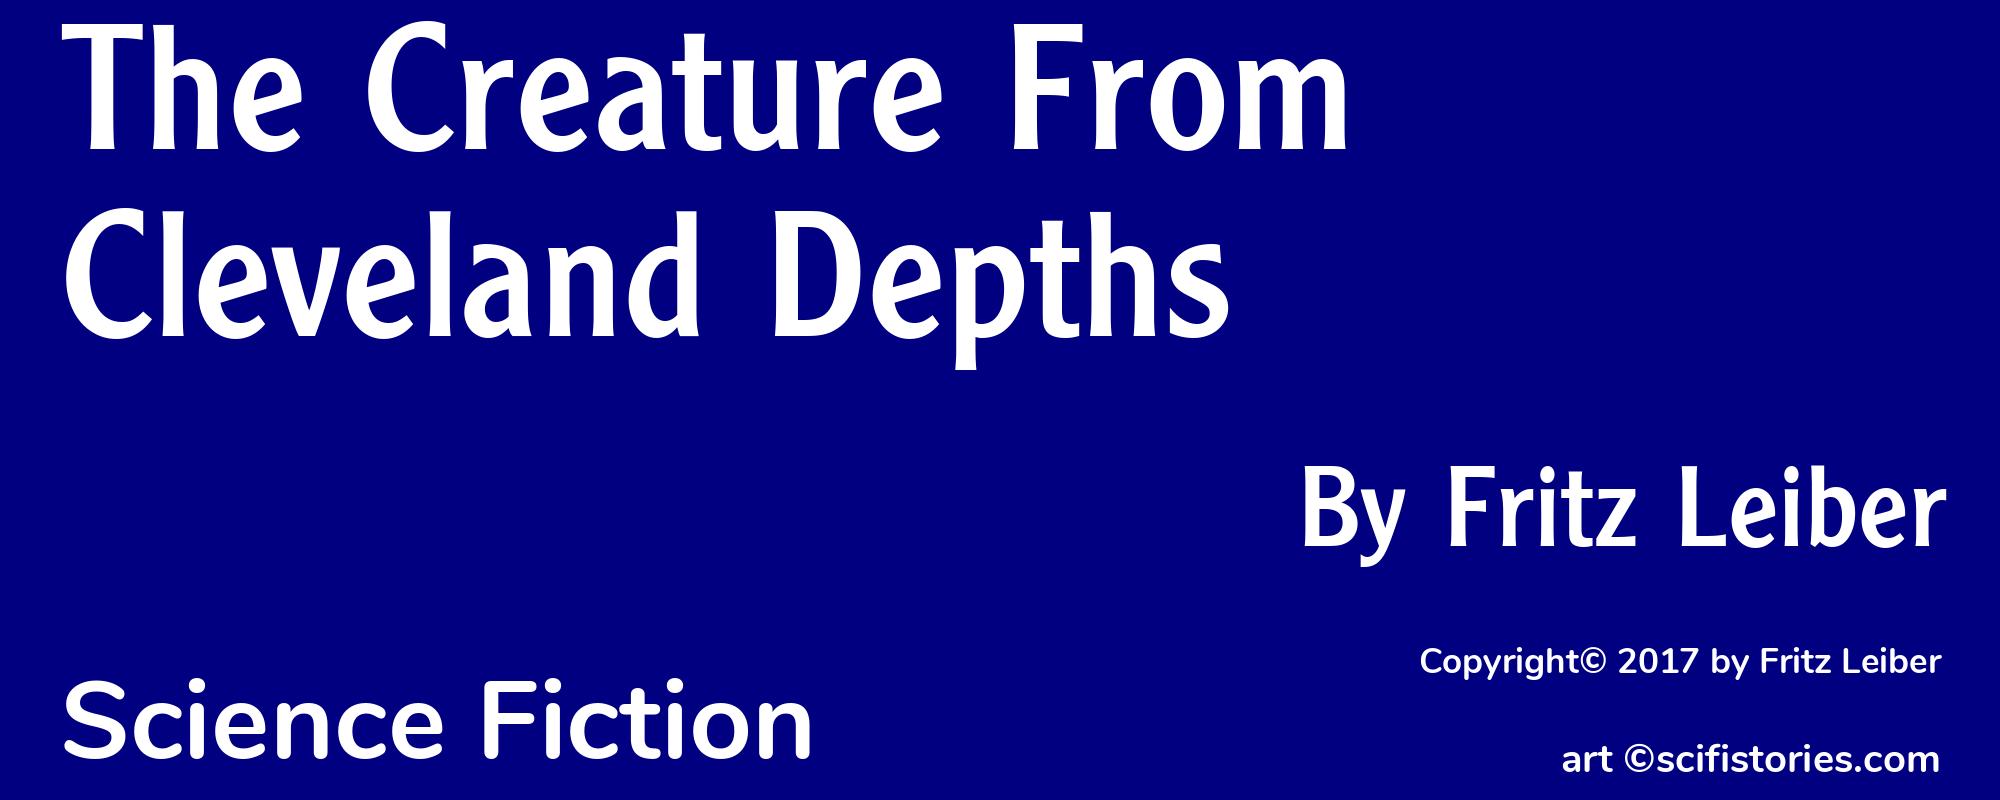 The Creature From Cleveland Depths - Cover